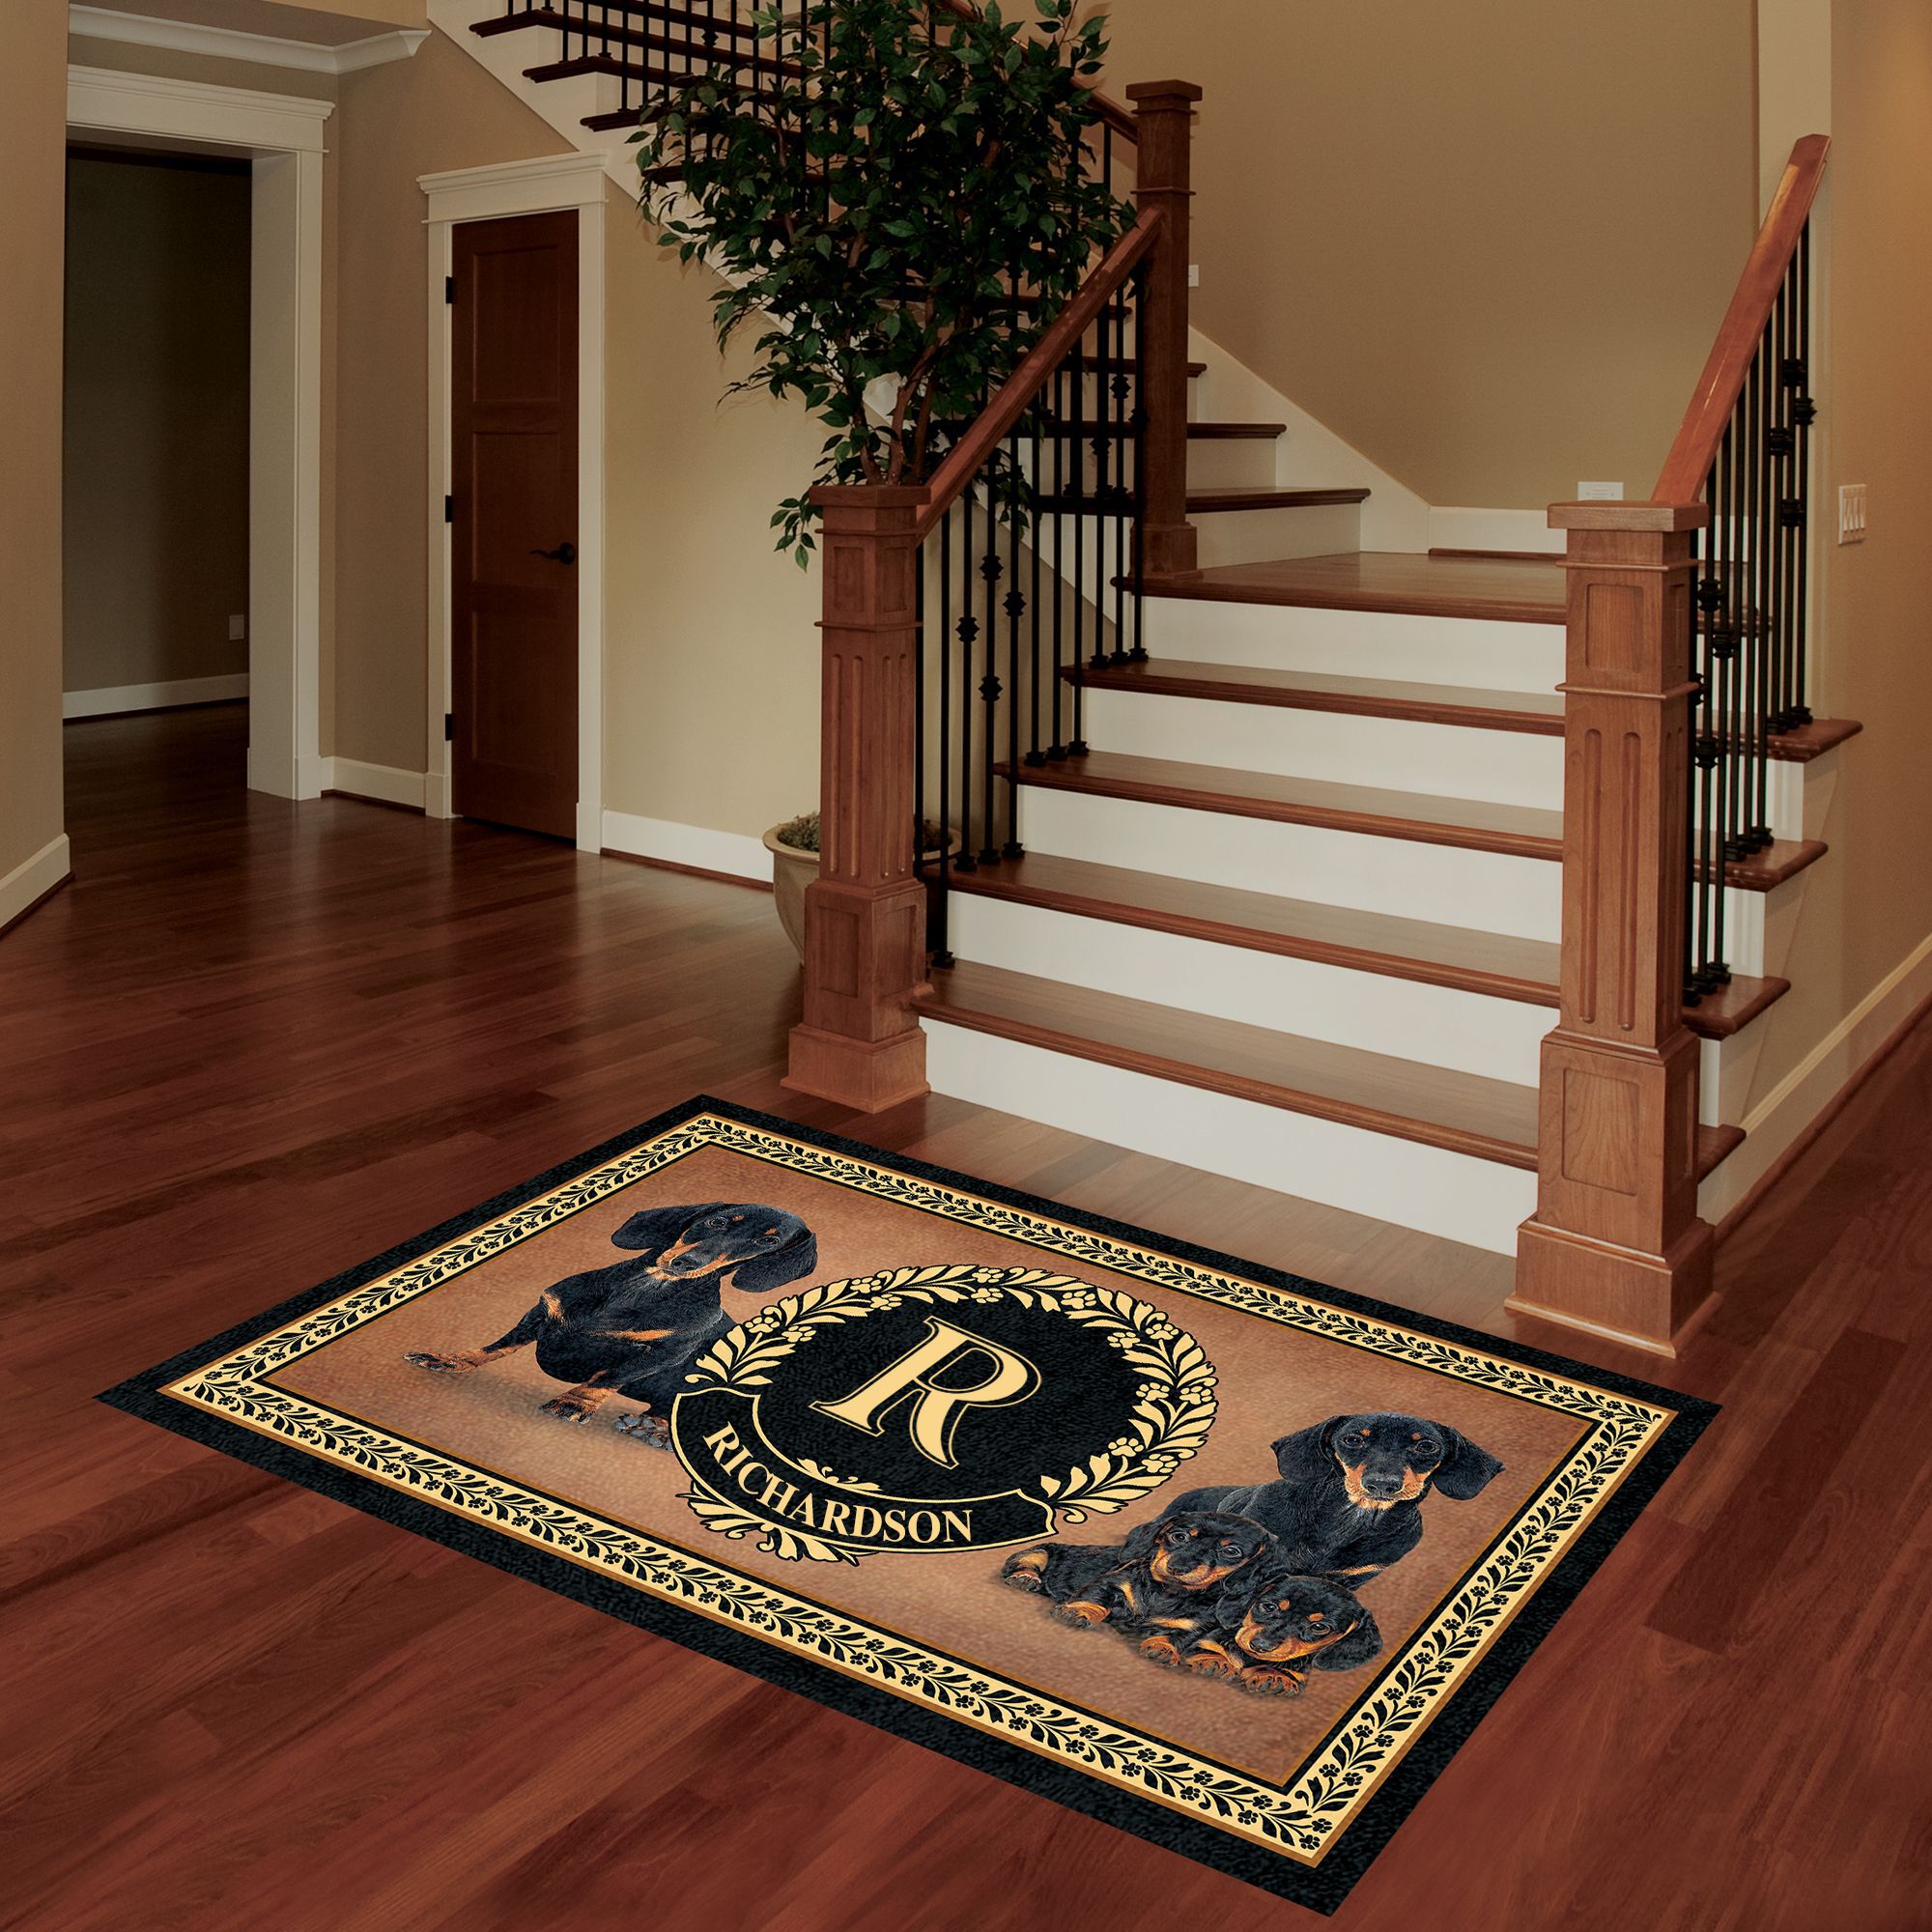 The Dog Accent Rug 6859 0033 b foyer